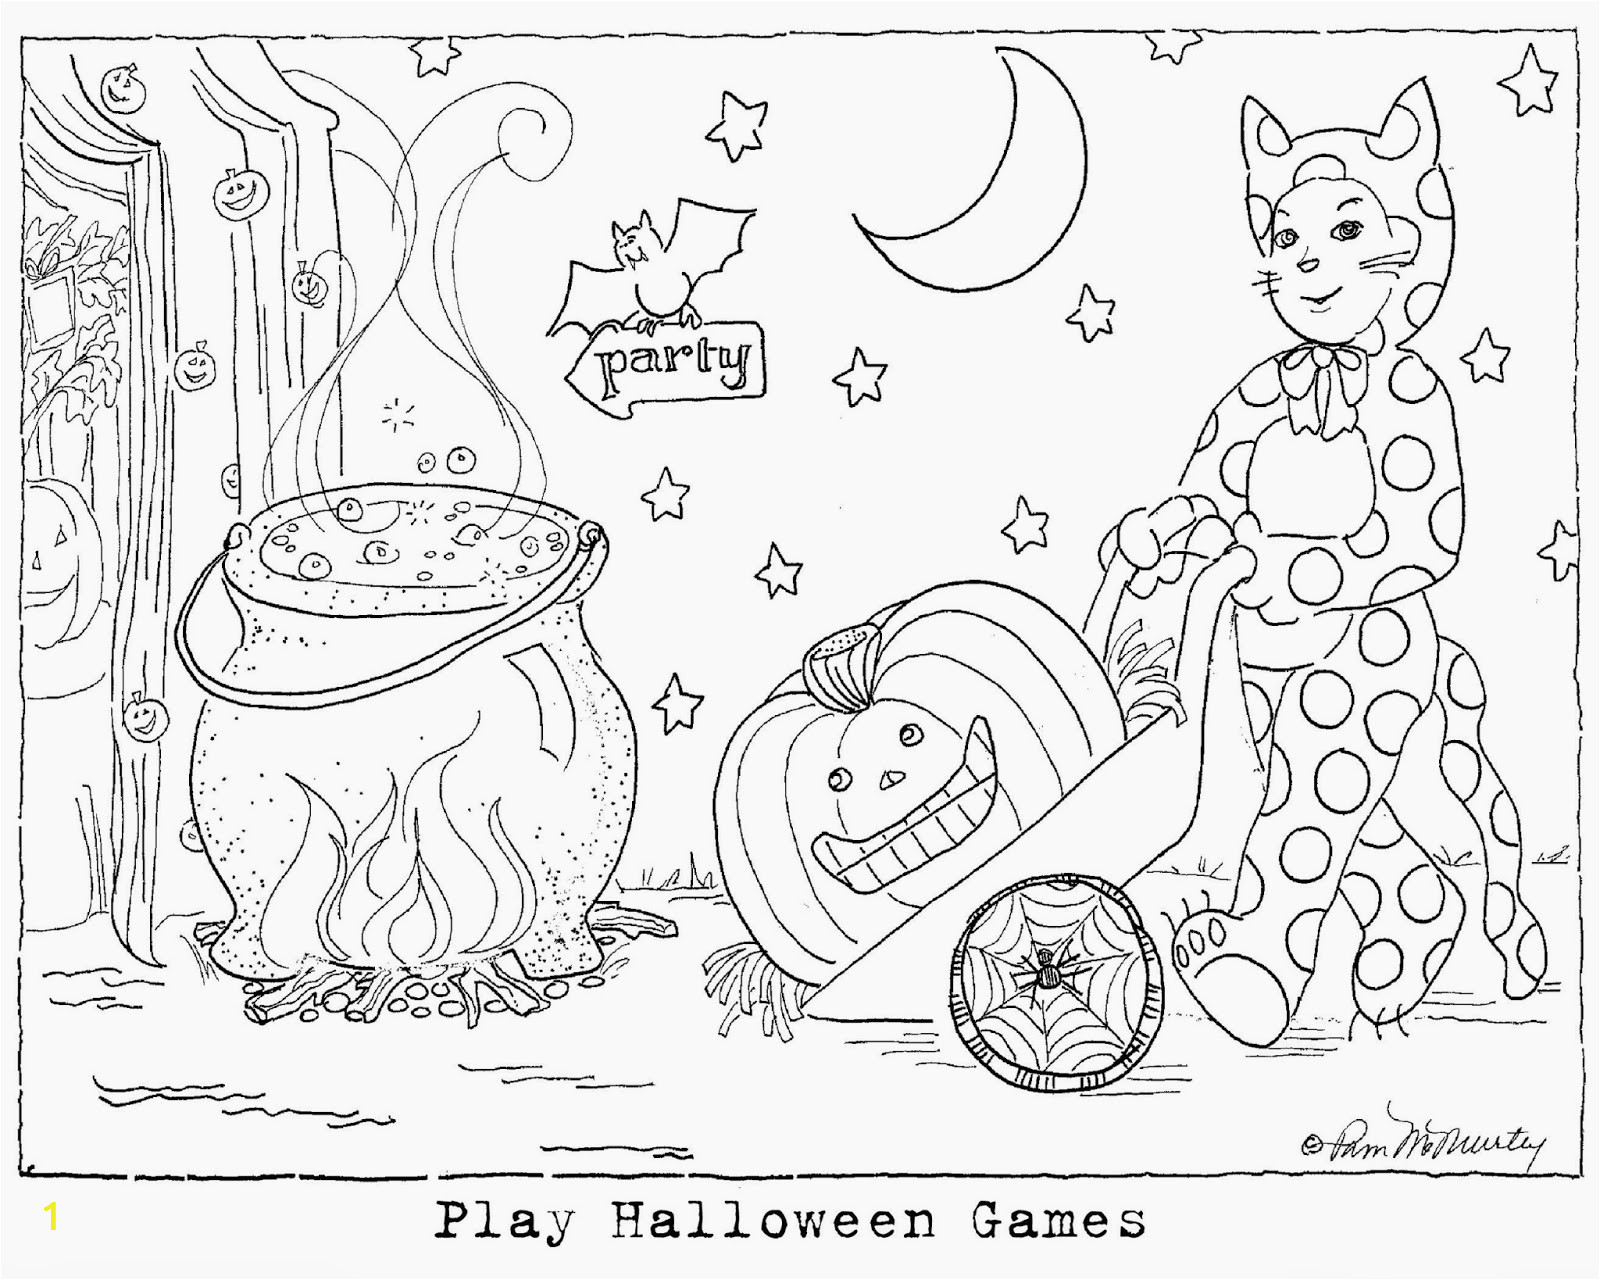 Free Printable County Fair Coloring Pages County Fair Coloring Pages at Getcolorings